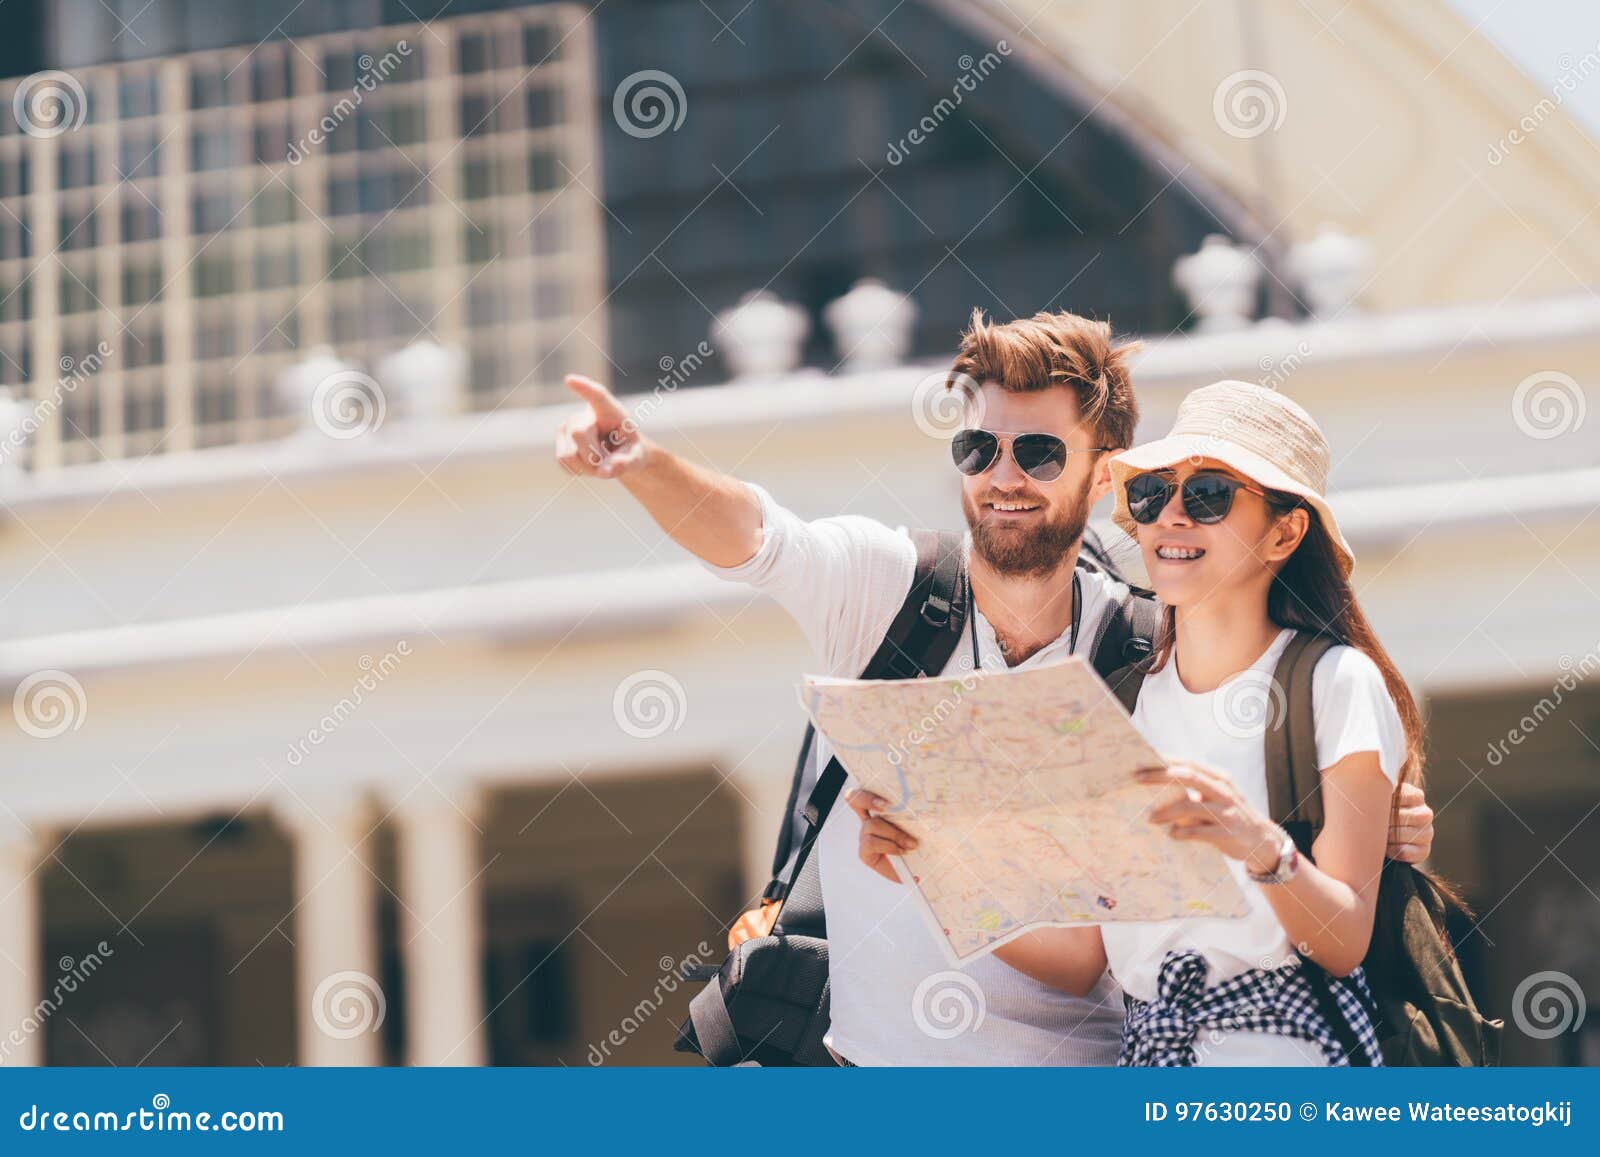 multiethnic traveler couple using generic local map together on sunny day. honeymoon trip, backpacker tourist, asia tourism